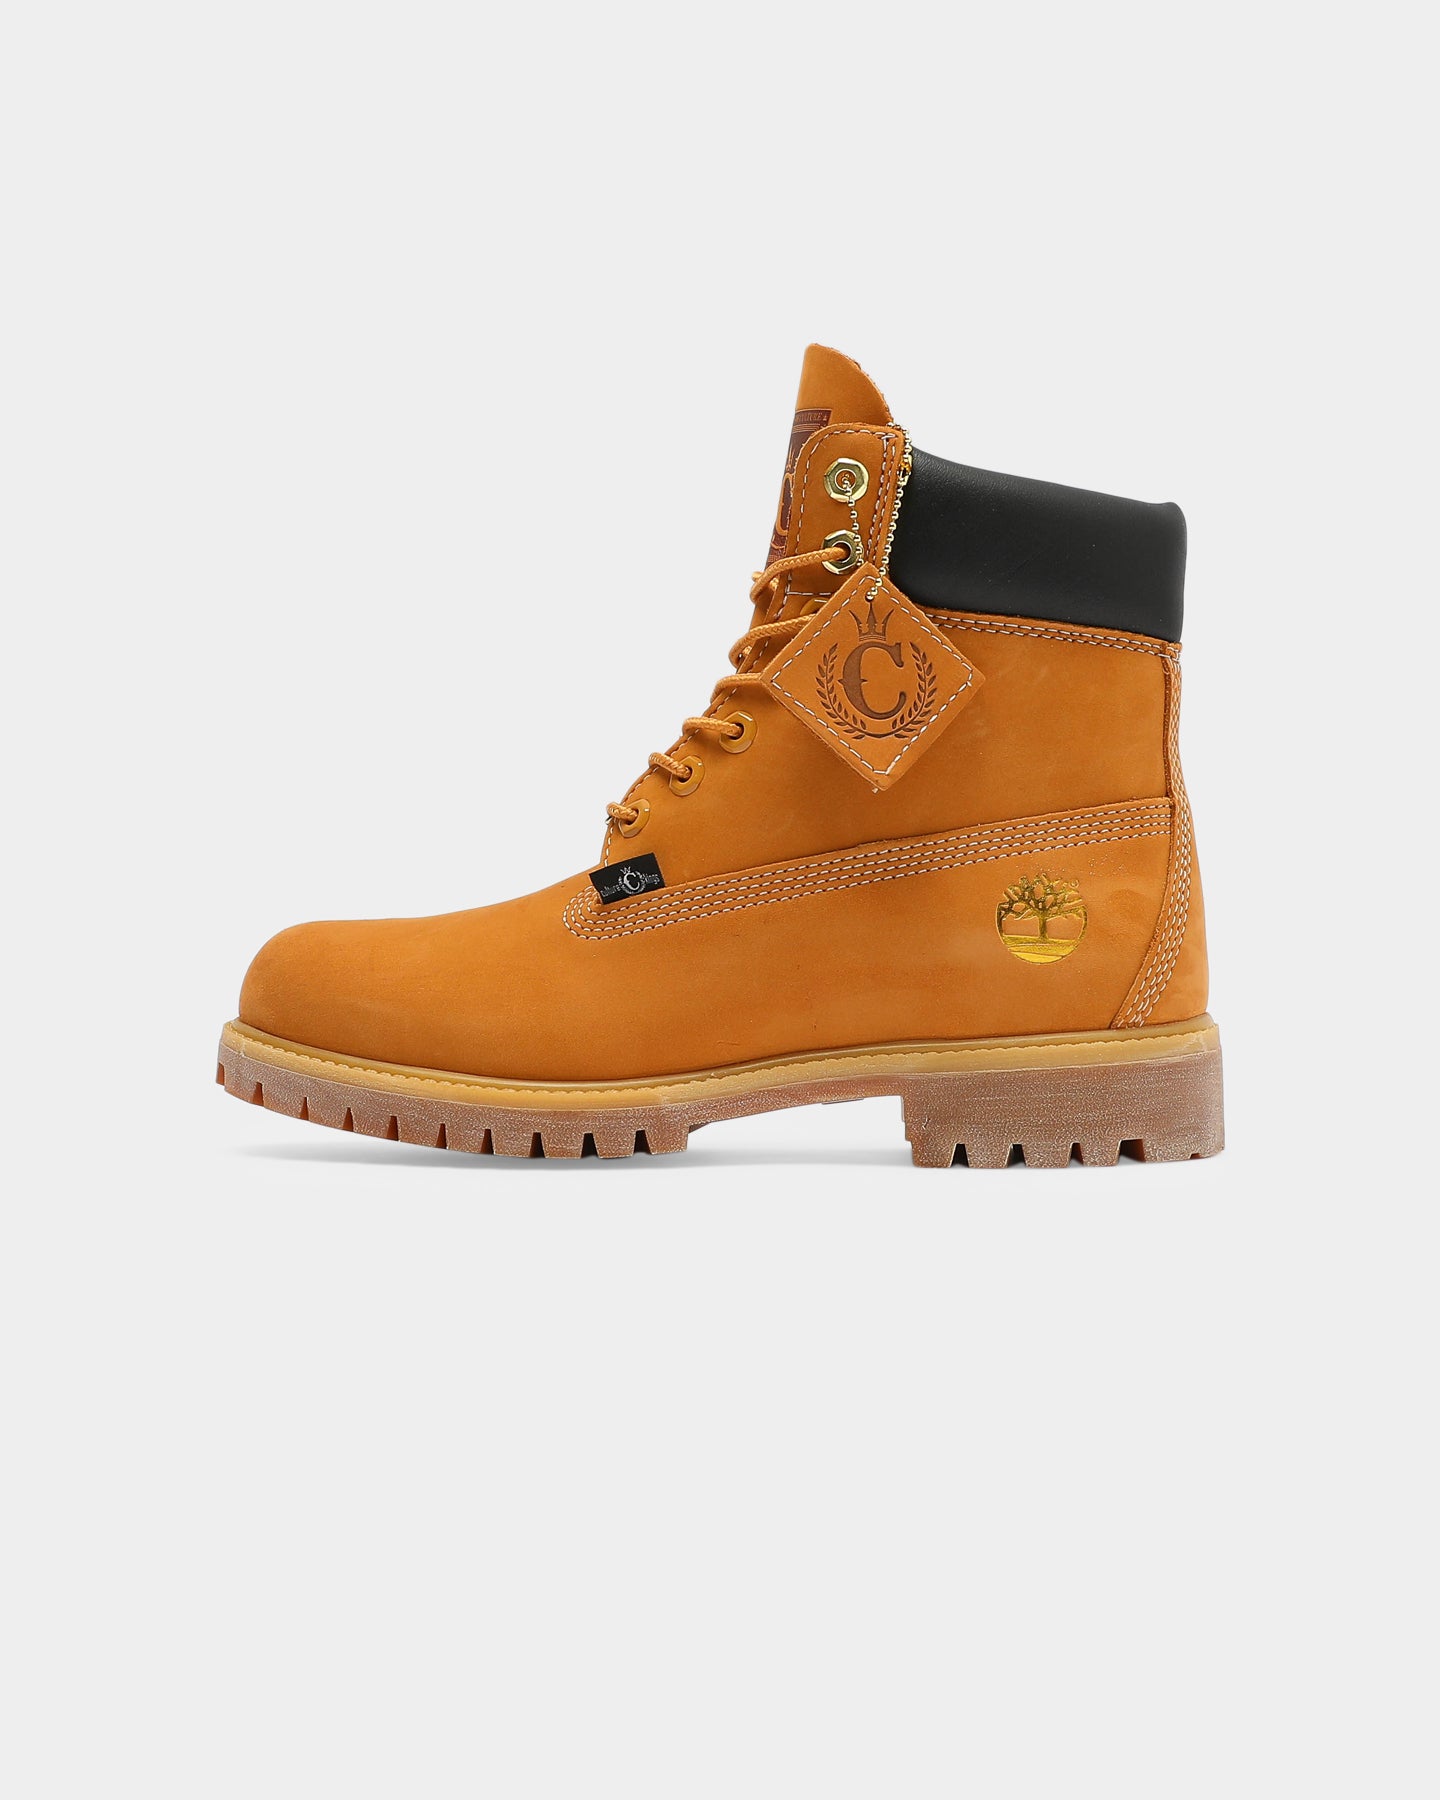 Culture Kings X Timberland 6 Inch Boot 